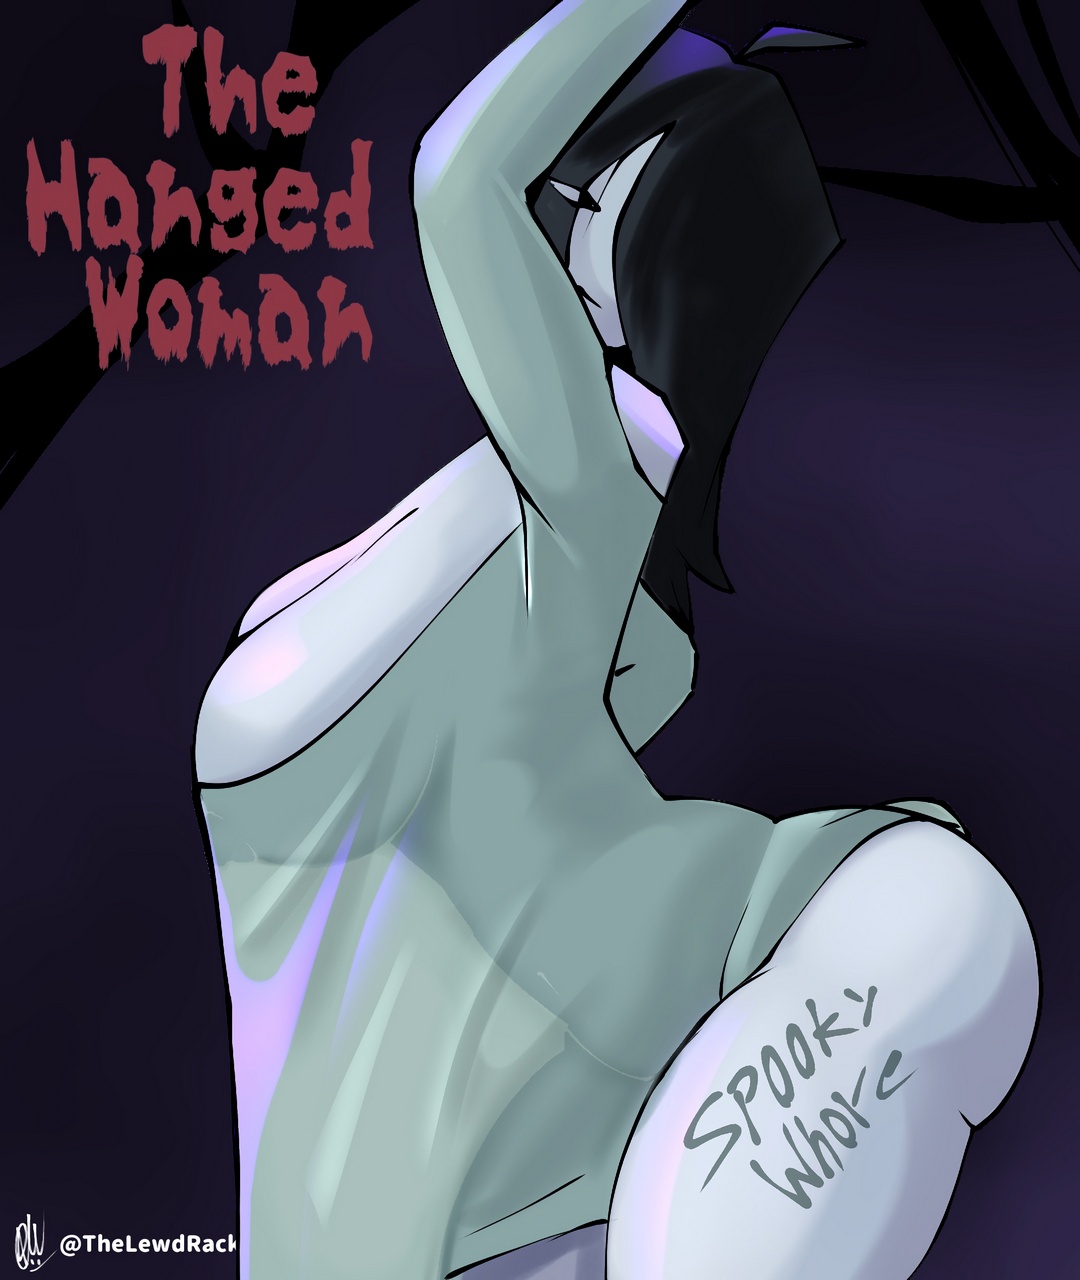 The Hanged Woman Thelewdrack 01